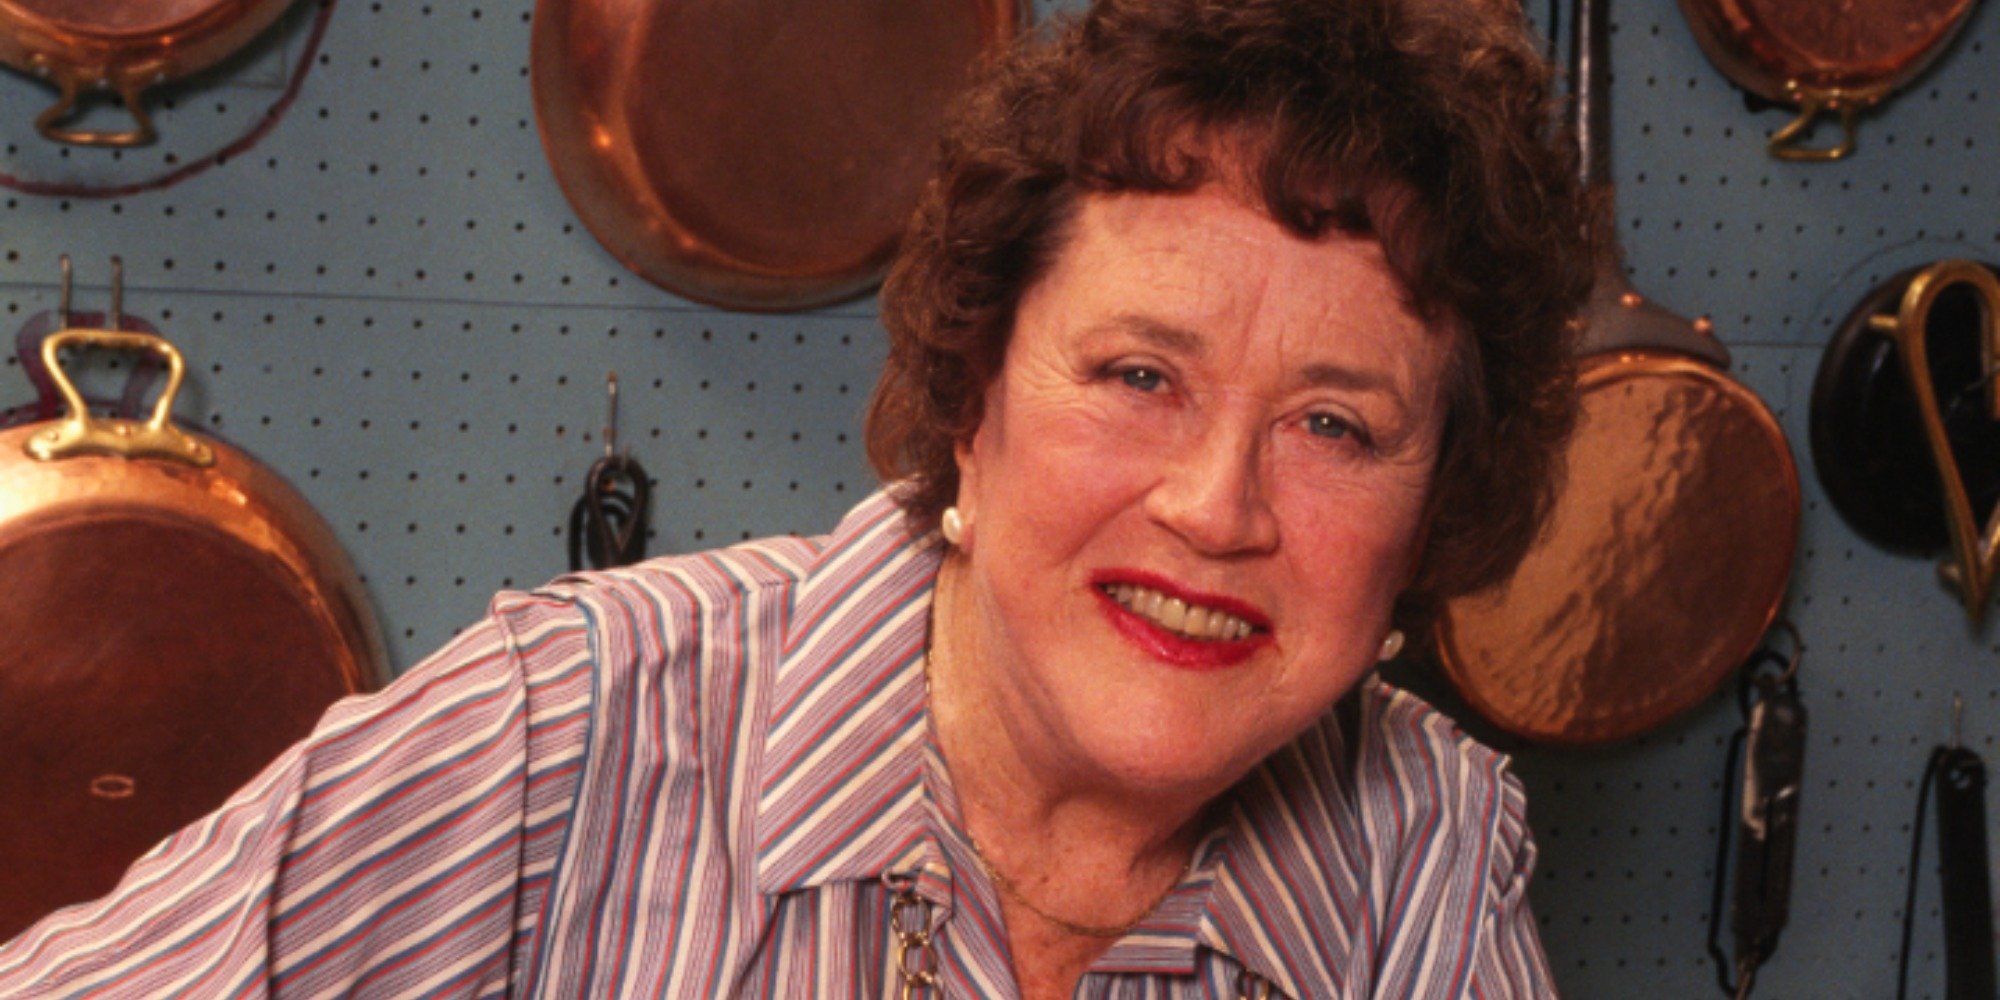 Julia Child poses for a photograph in her home kitchen.